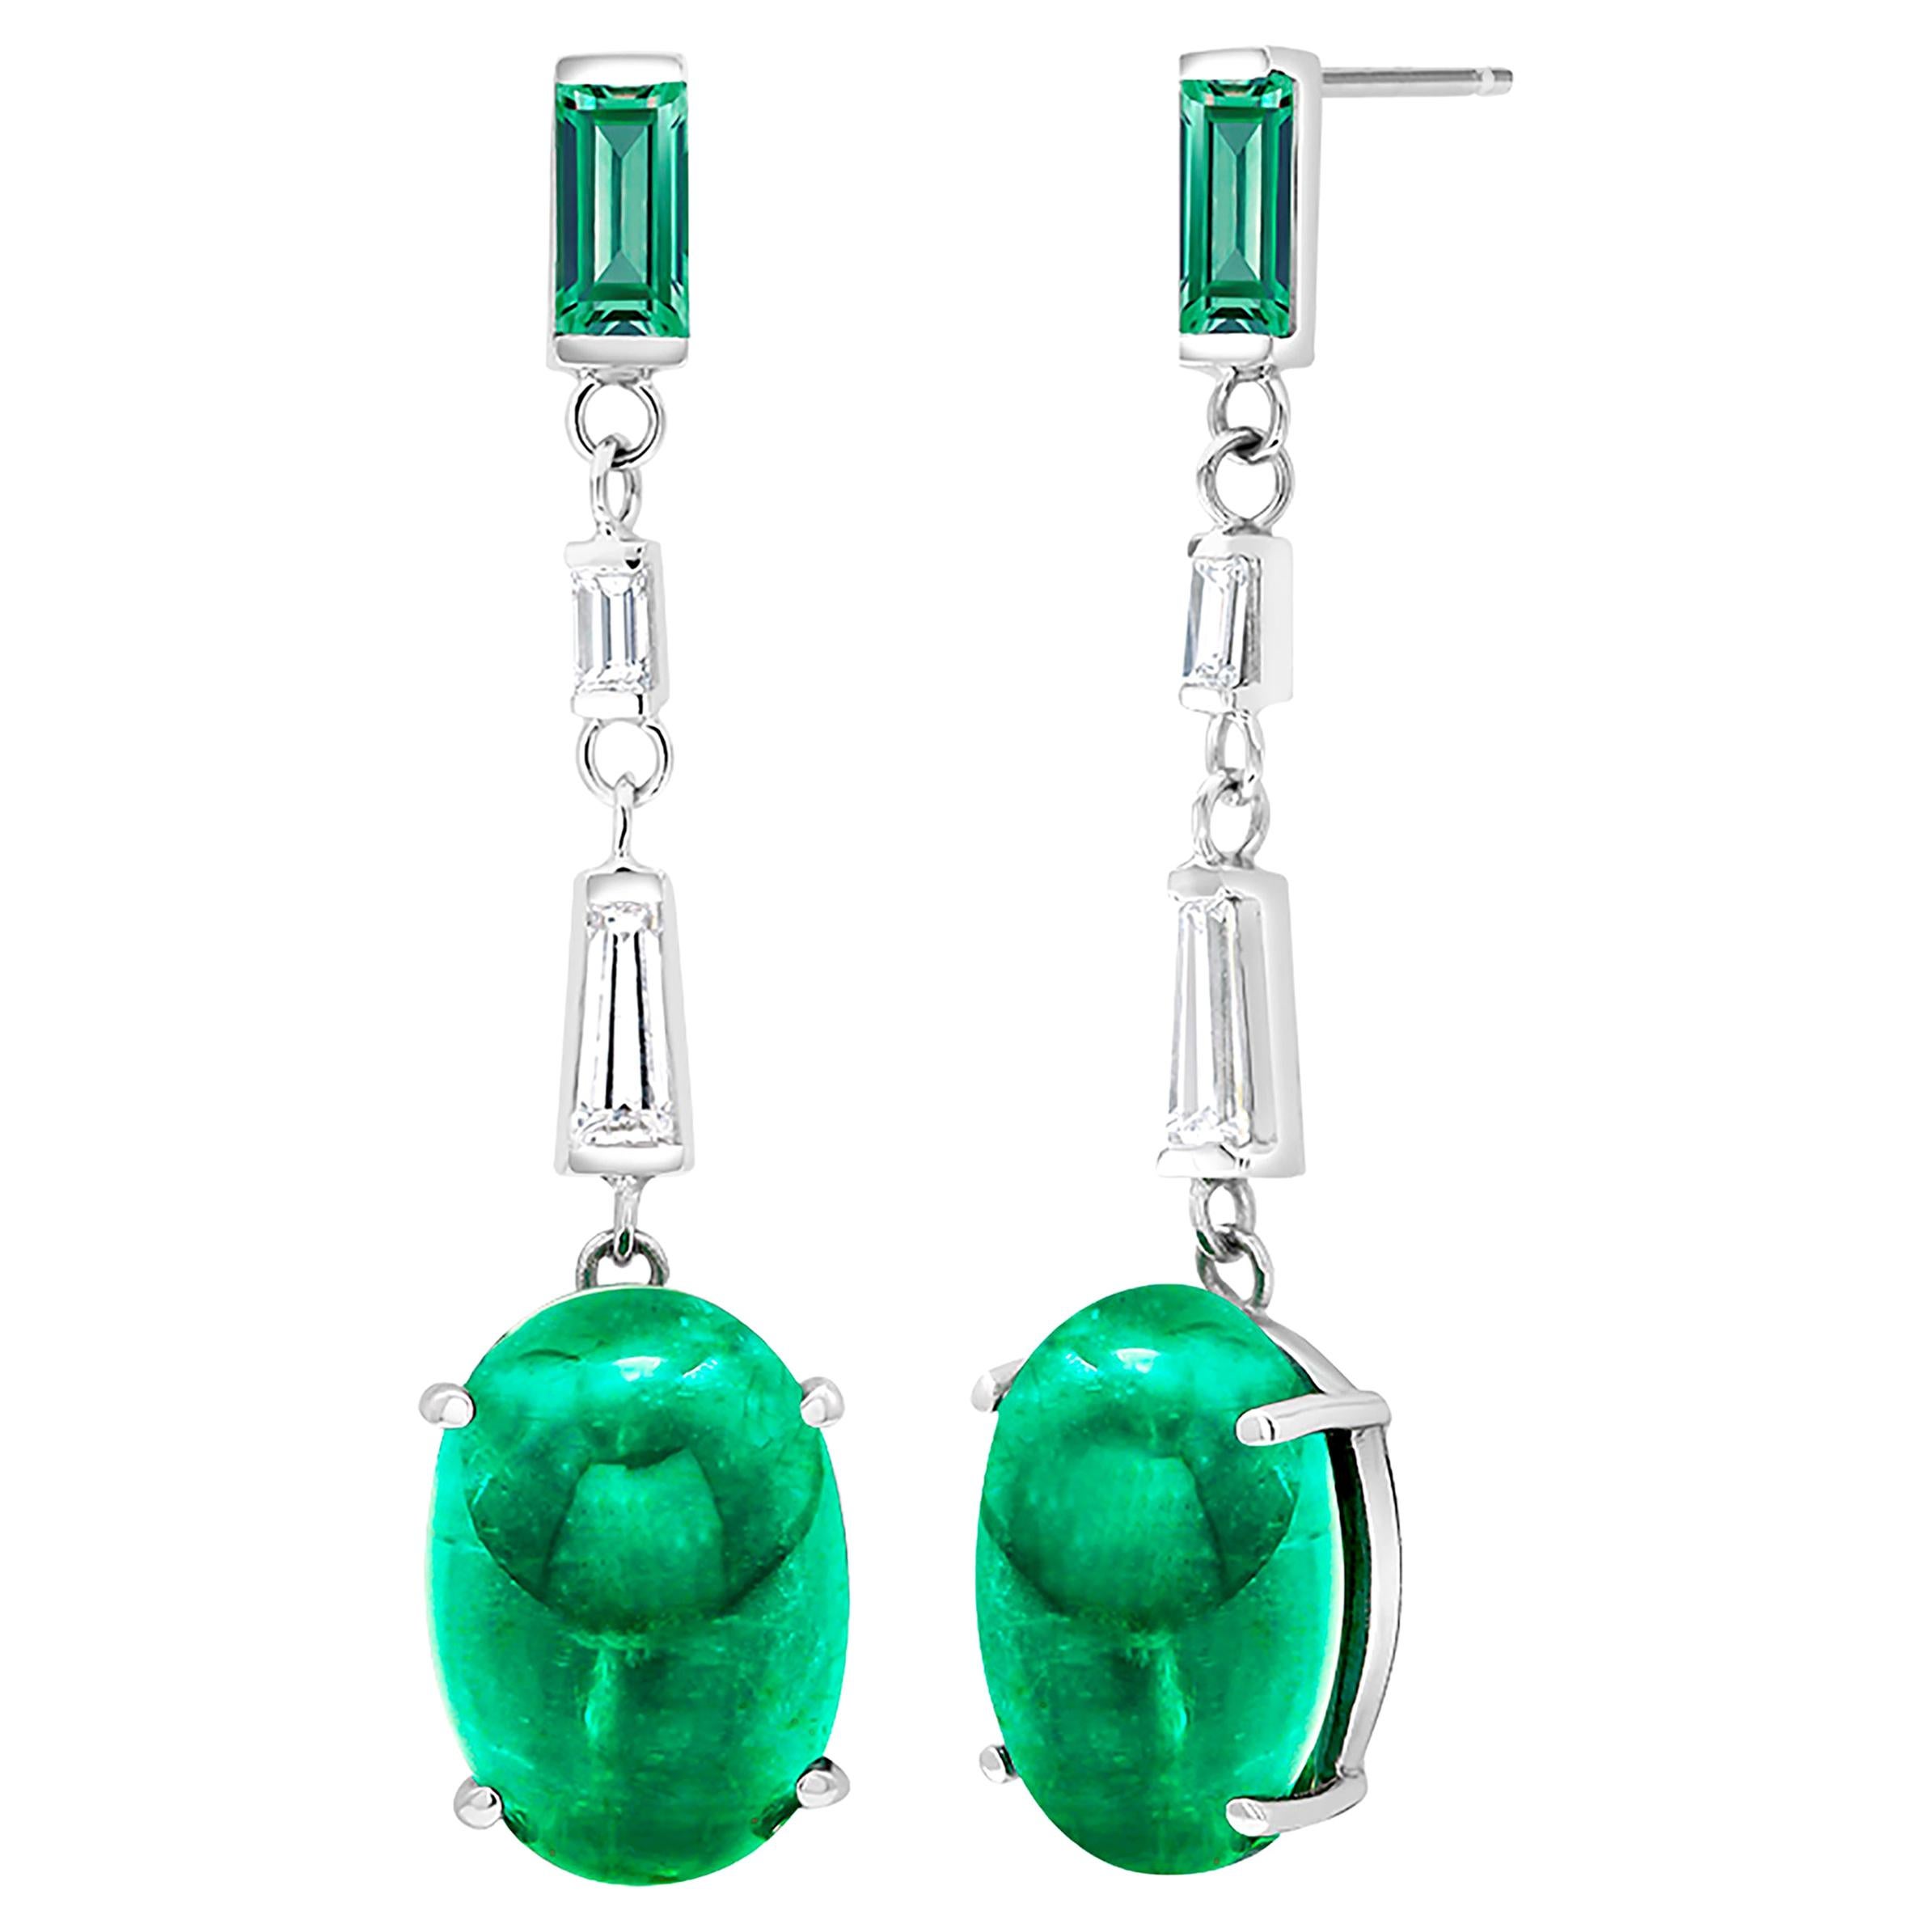 Cabochon Emerald Baguette Diamond White Gold Earrings Weighing 15.02 Carat